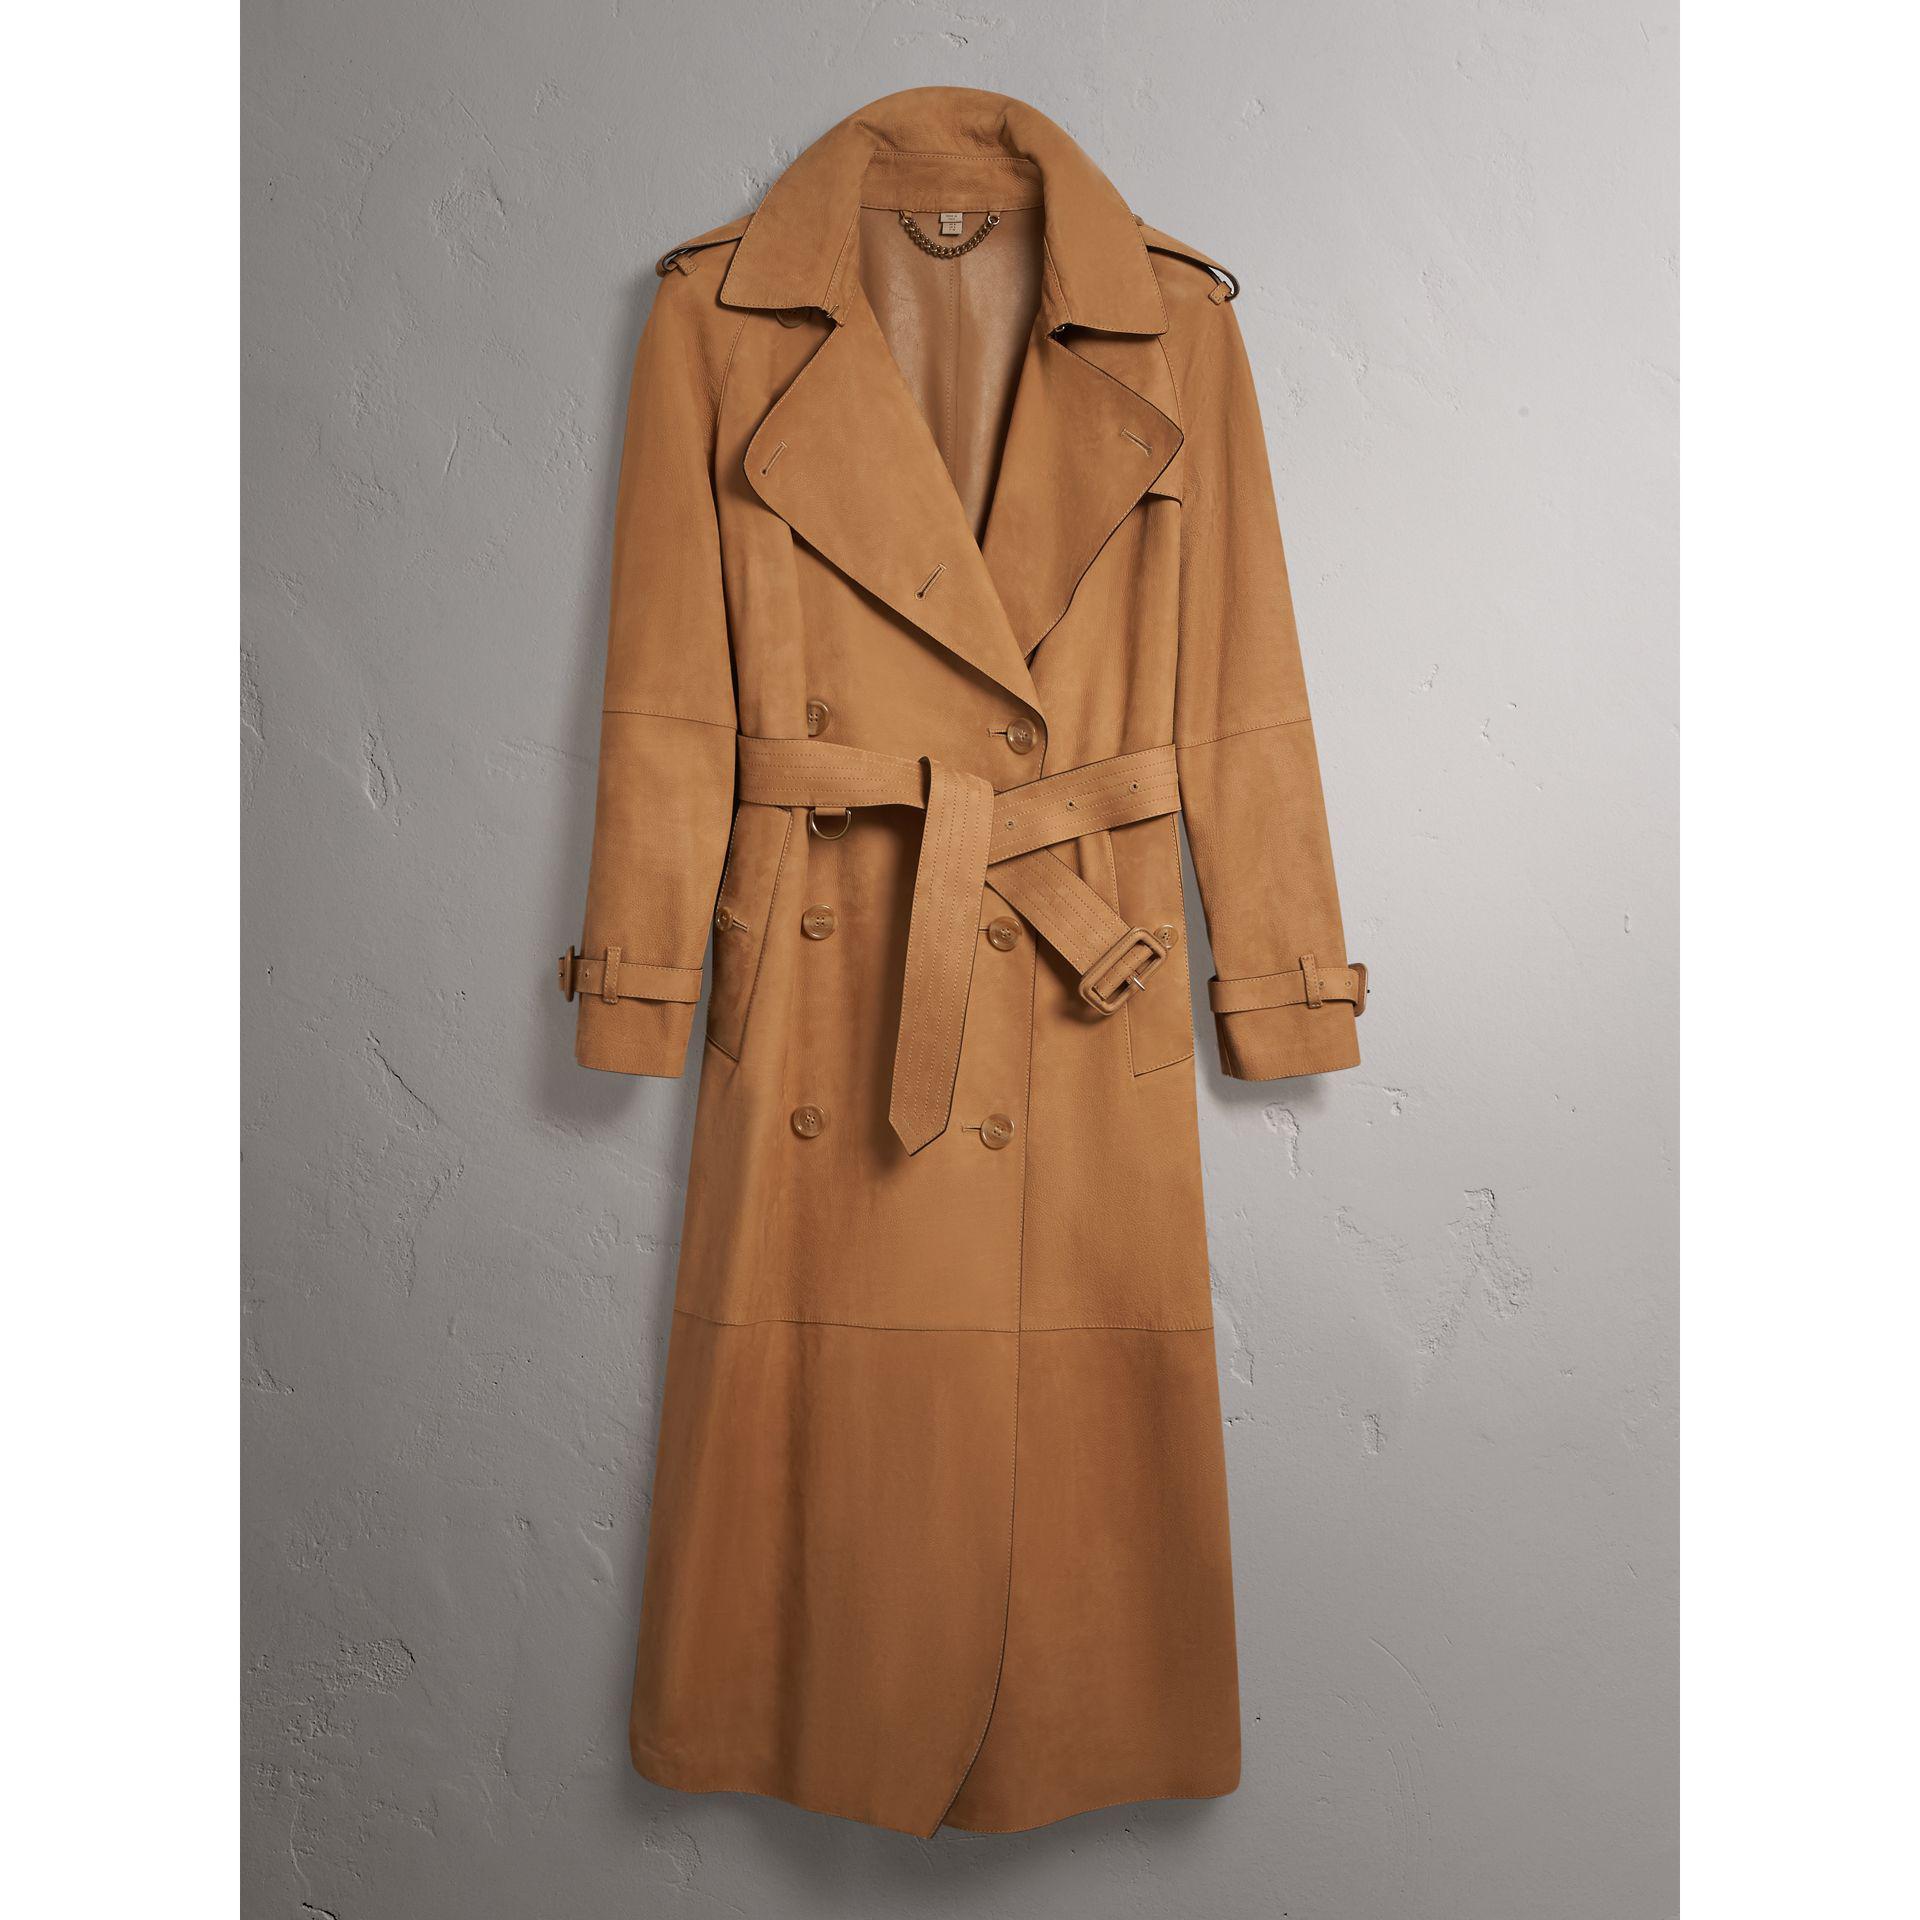 Burberry Nubuck Trench Coat in Caramel (Brown) - Lyst